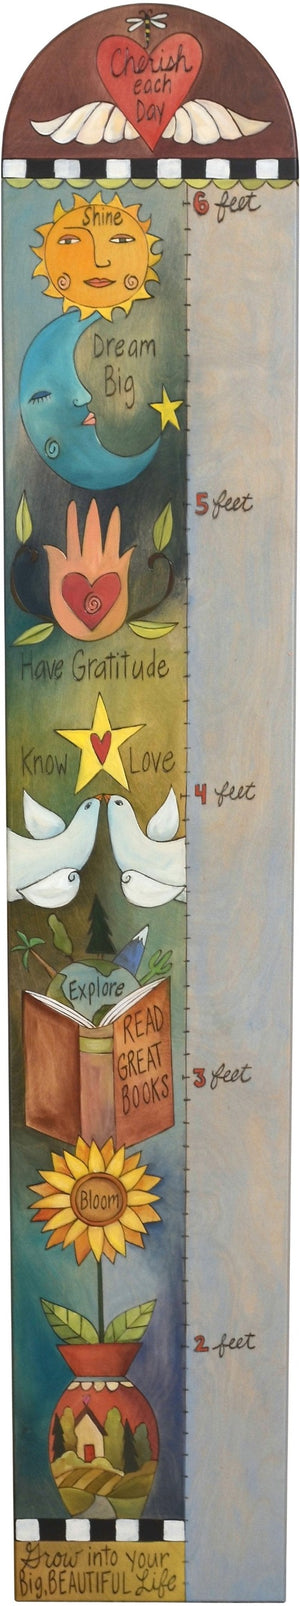 Everlasting Growth Chart –  Elegant growth chart with symbolic icons and a heart with wings at the top